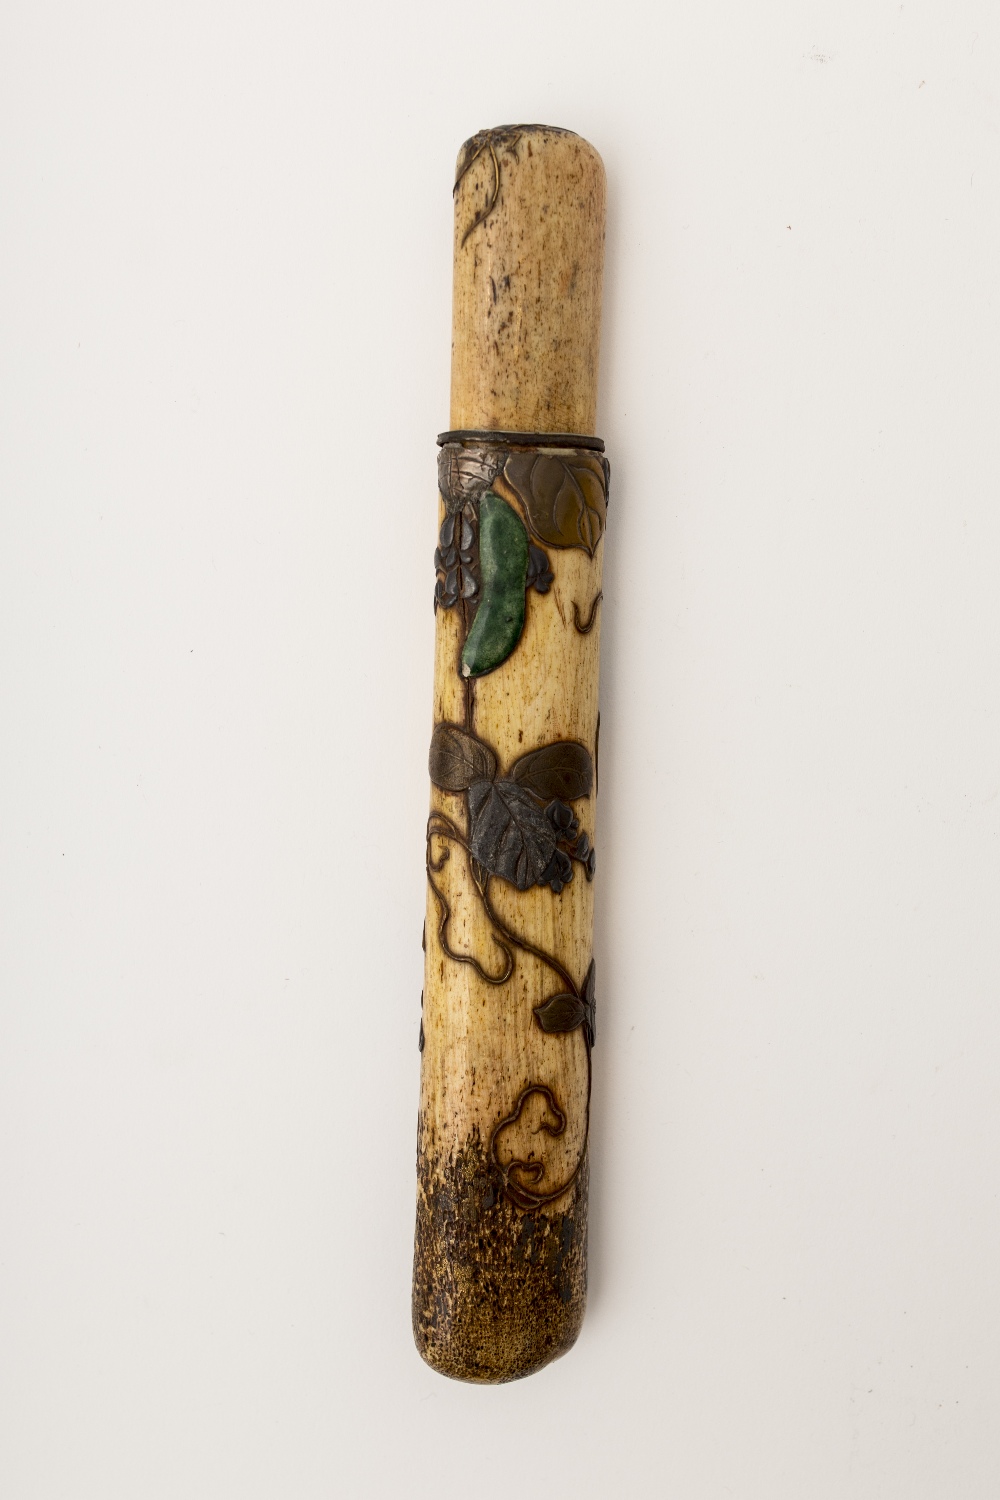 Kiseruzutsu pipe case, Japan, Meiji periodBone inlaid with metal and lacquer, decorated with